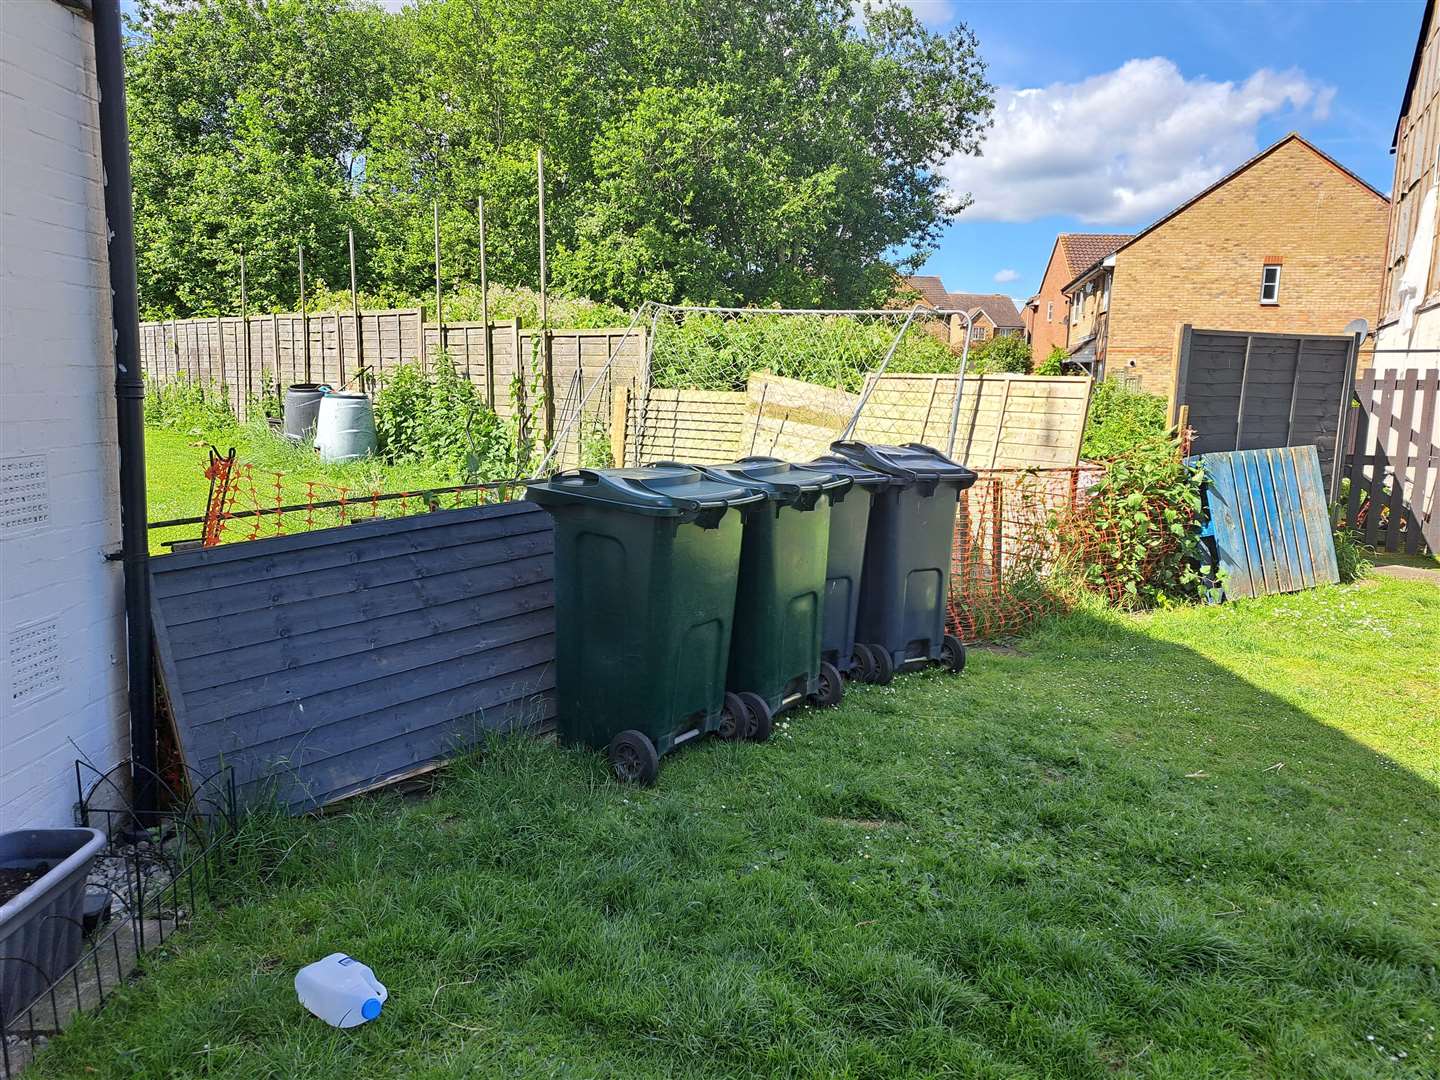 Christine and Sean's fence was completely destroyed during the storm in February, leaving them having to make a temporary one using bins and broken fence panels